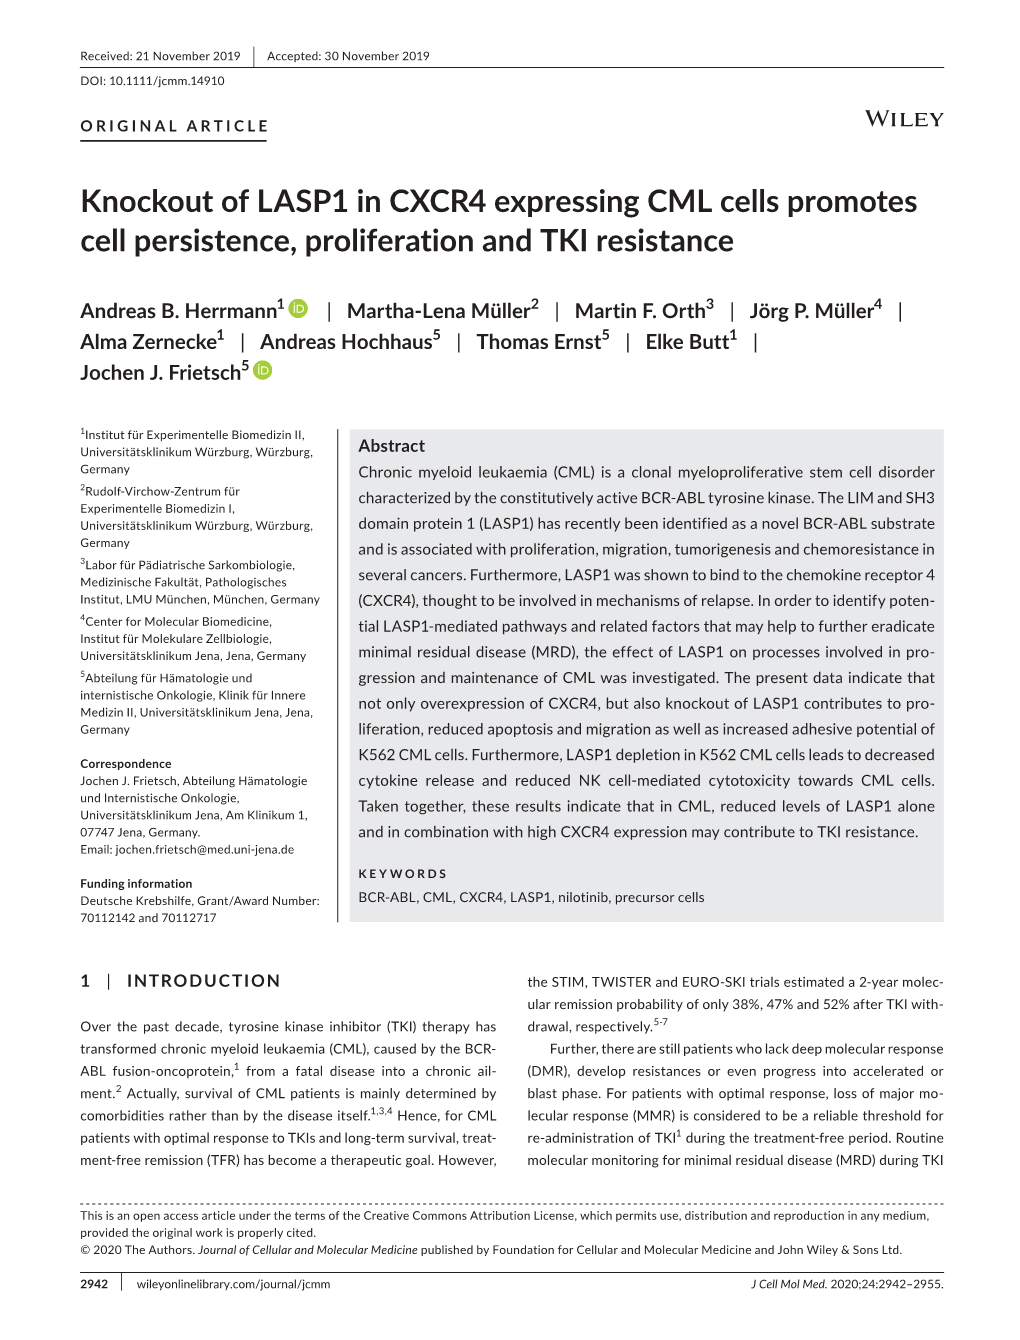 Knockout of LASP1 in CXCR4 Expressing CML Cells Promotes Cell Persistence, Proliferation and TKI Resistance